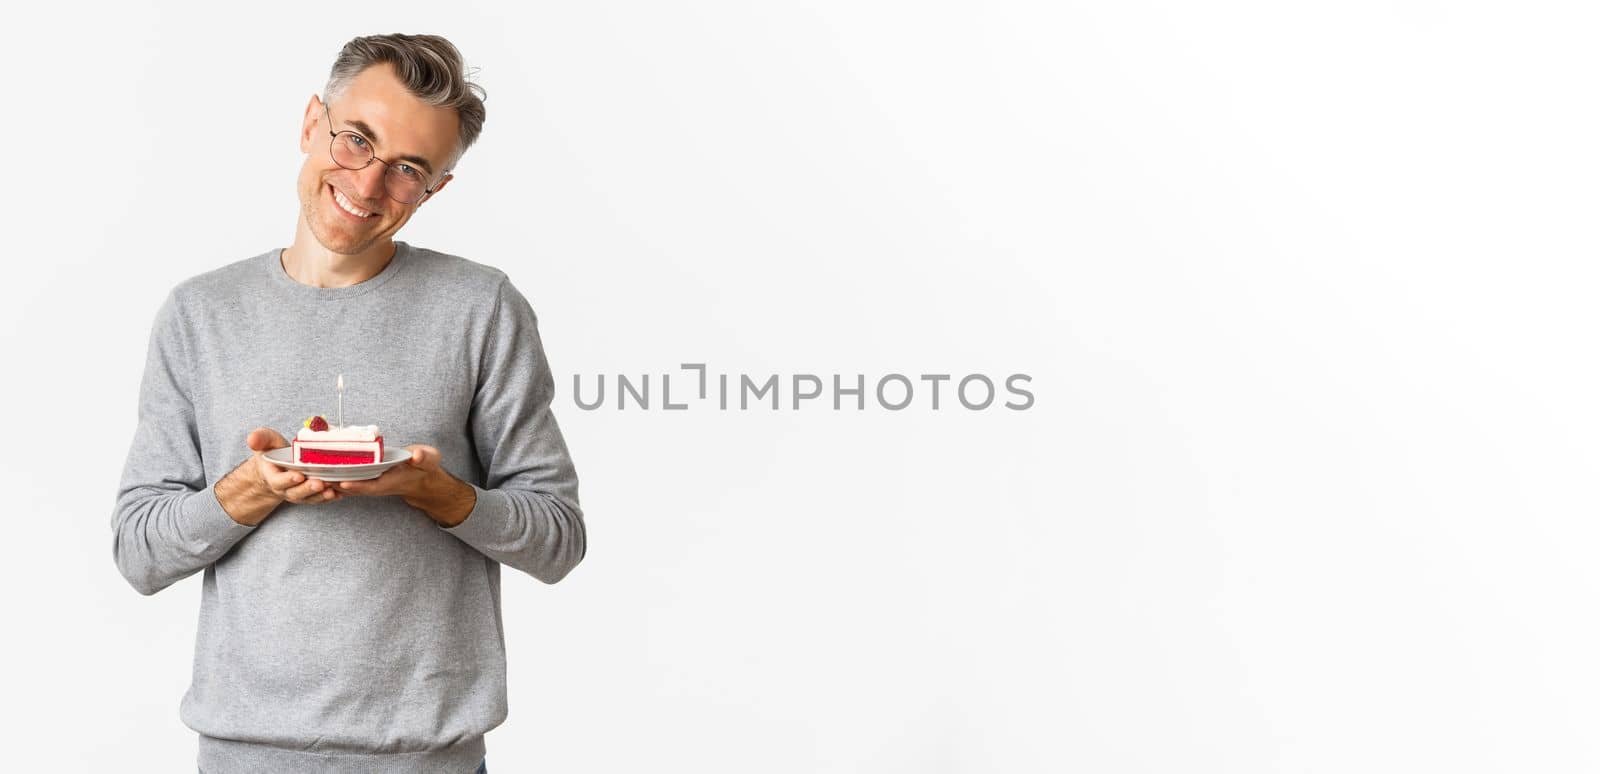 Portrait of smiling middle-aged man, looking touched and happy, celebrating birthday, holding b-day cake and celebrating, standing over white background.